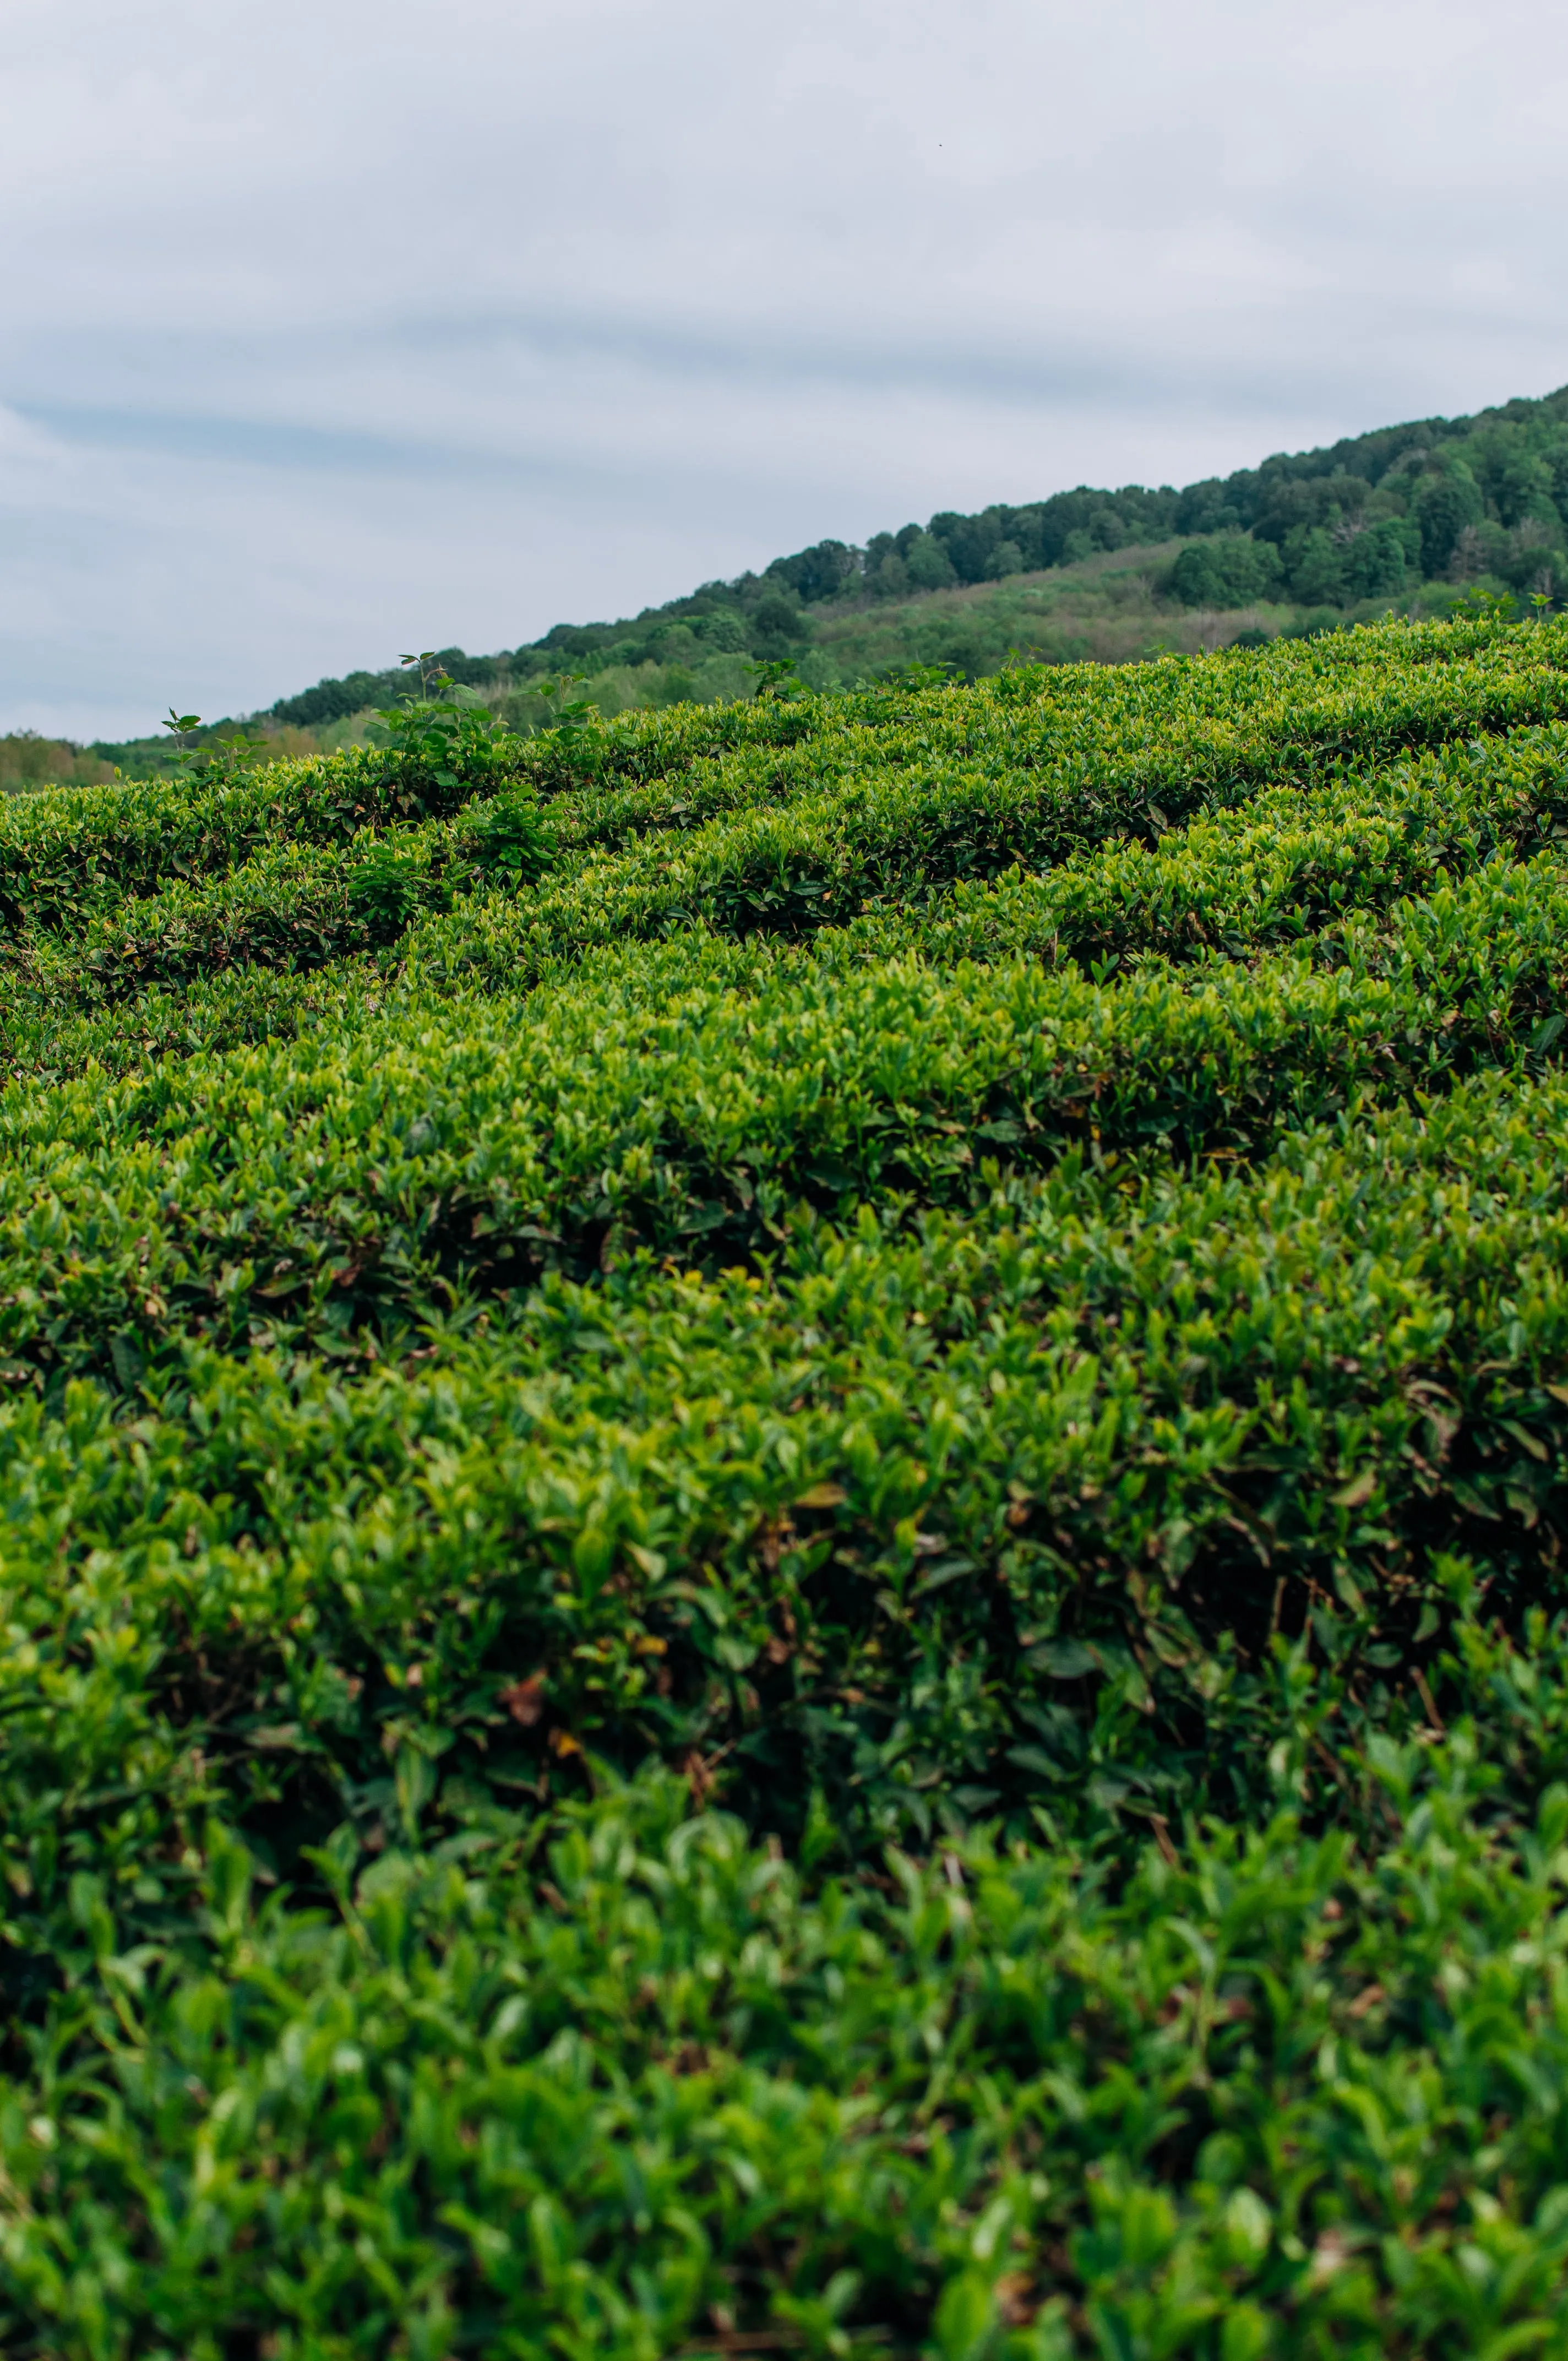 view of tea plants in a tea garden with hills in the background